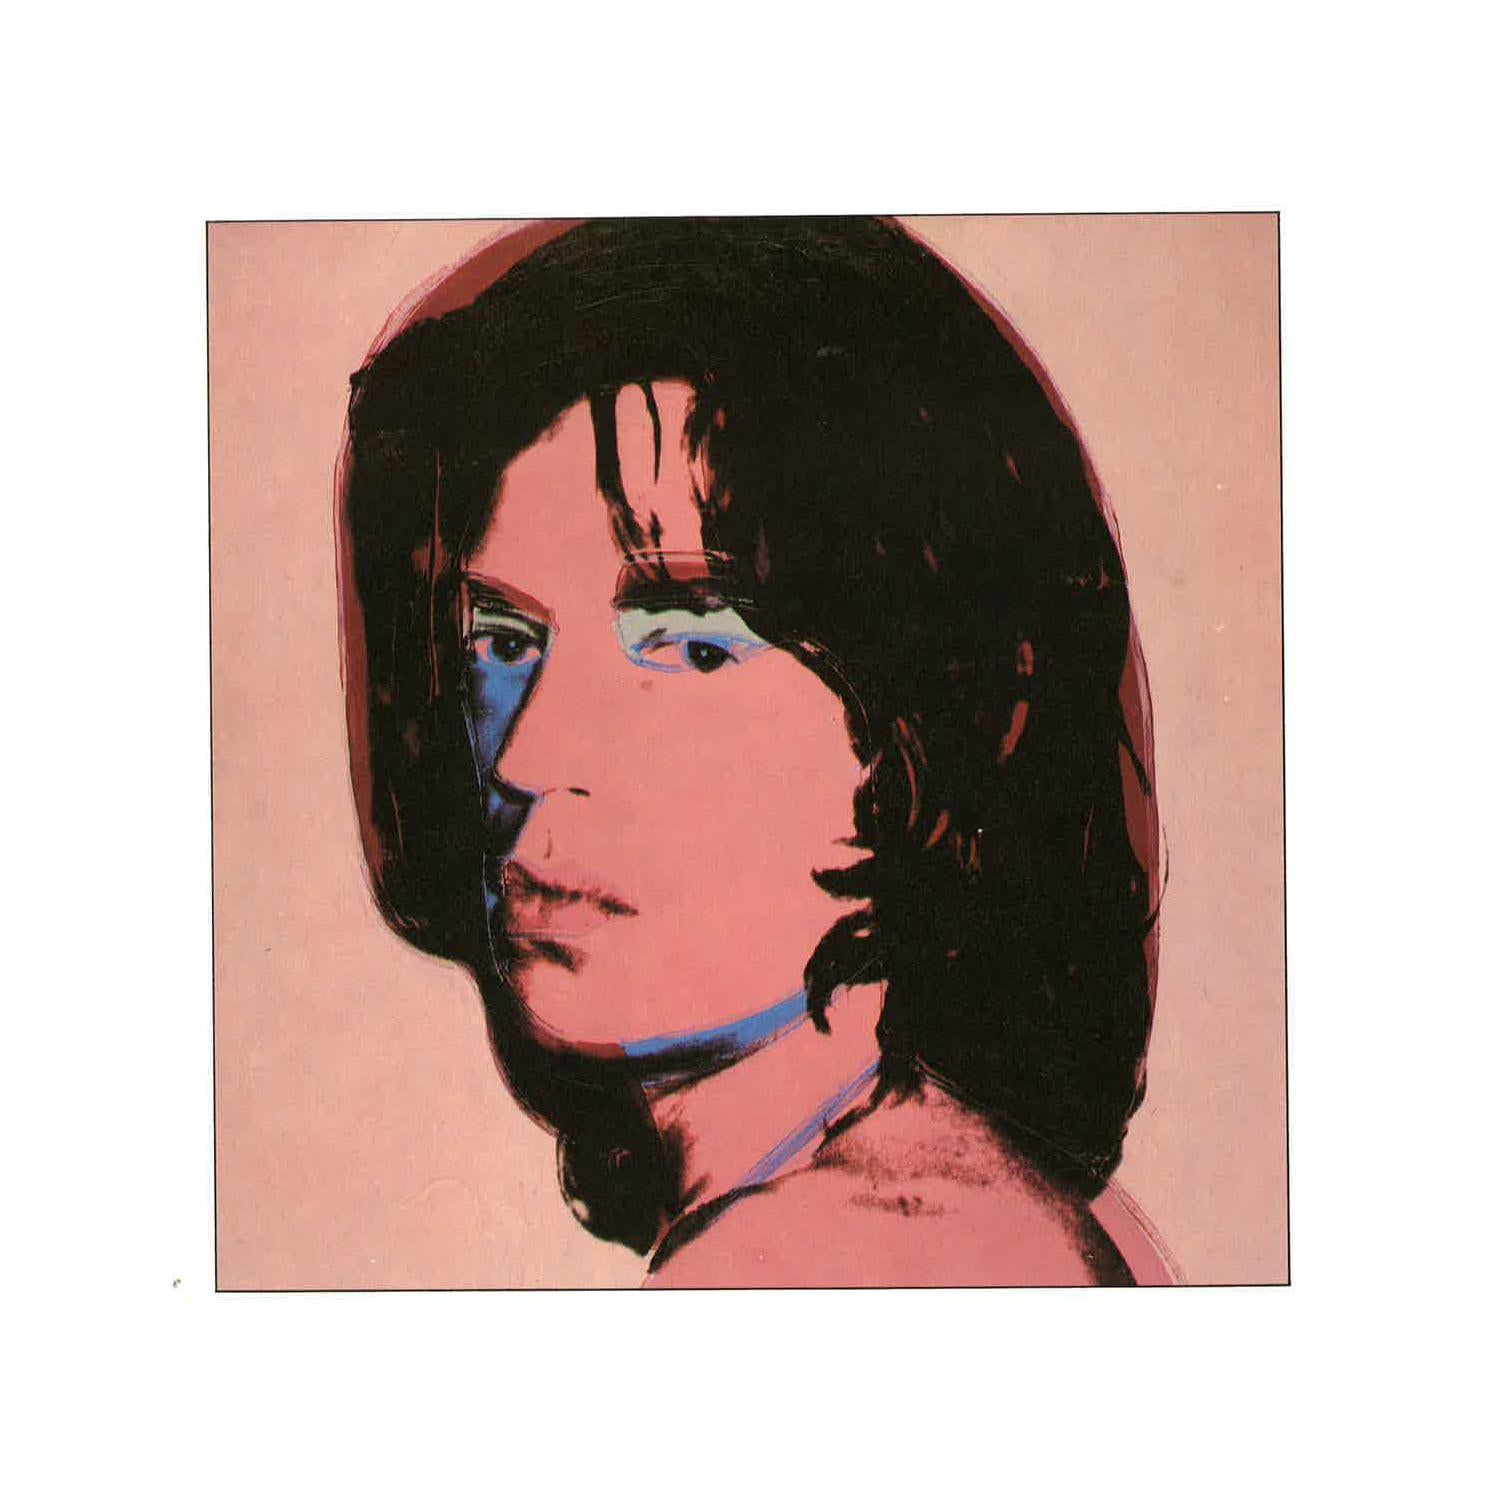 Reproductiver print after Warhol, Mick Jagger - Blue Eye Tint - Art by (after) Andy Warhol